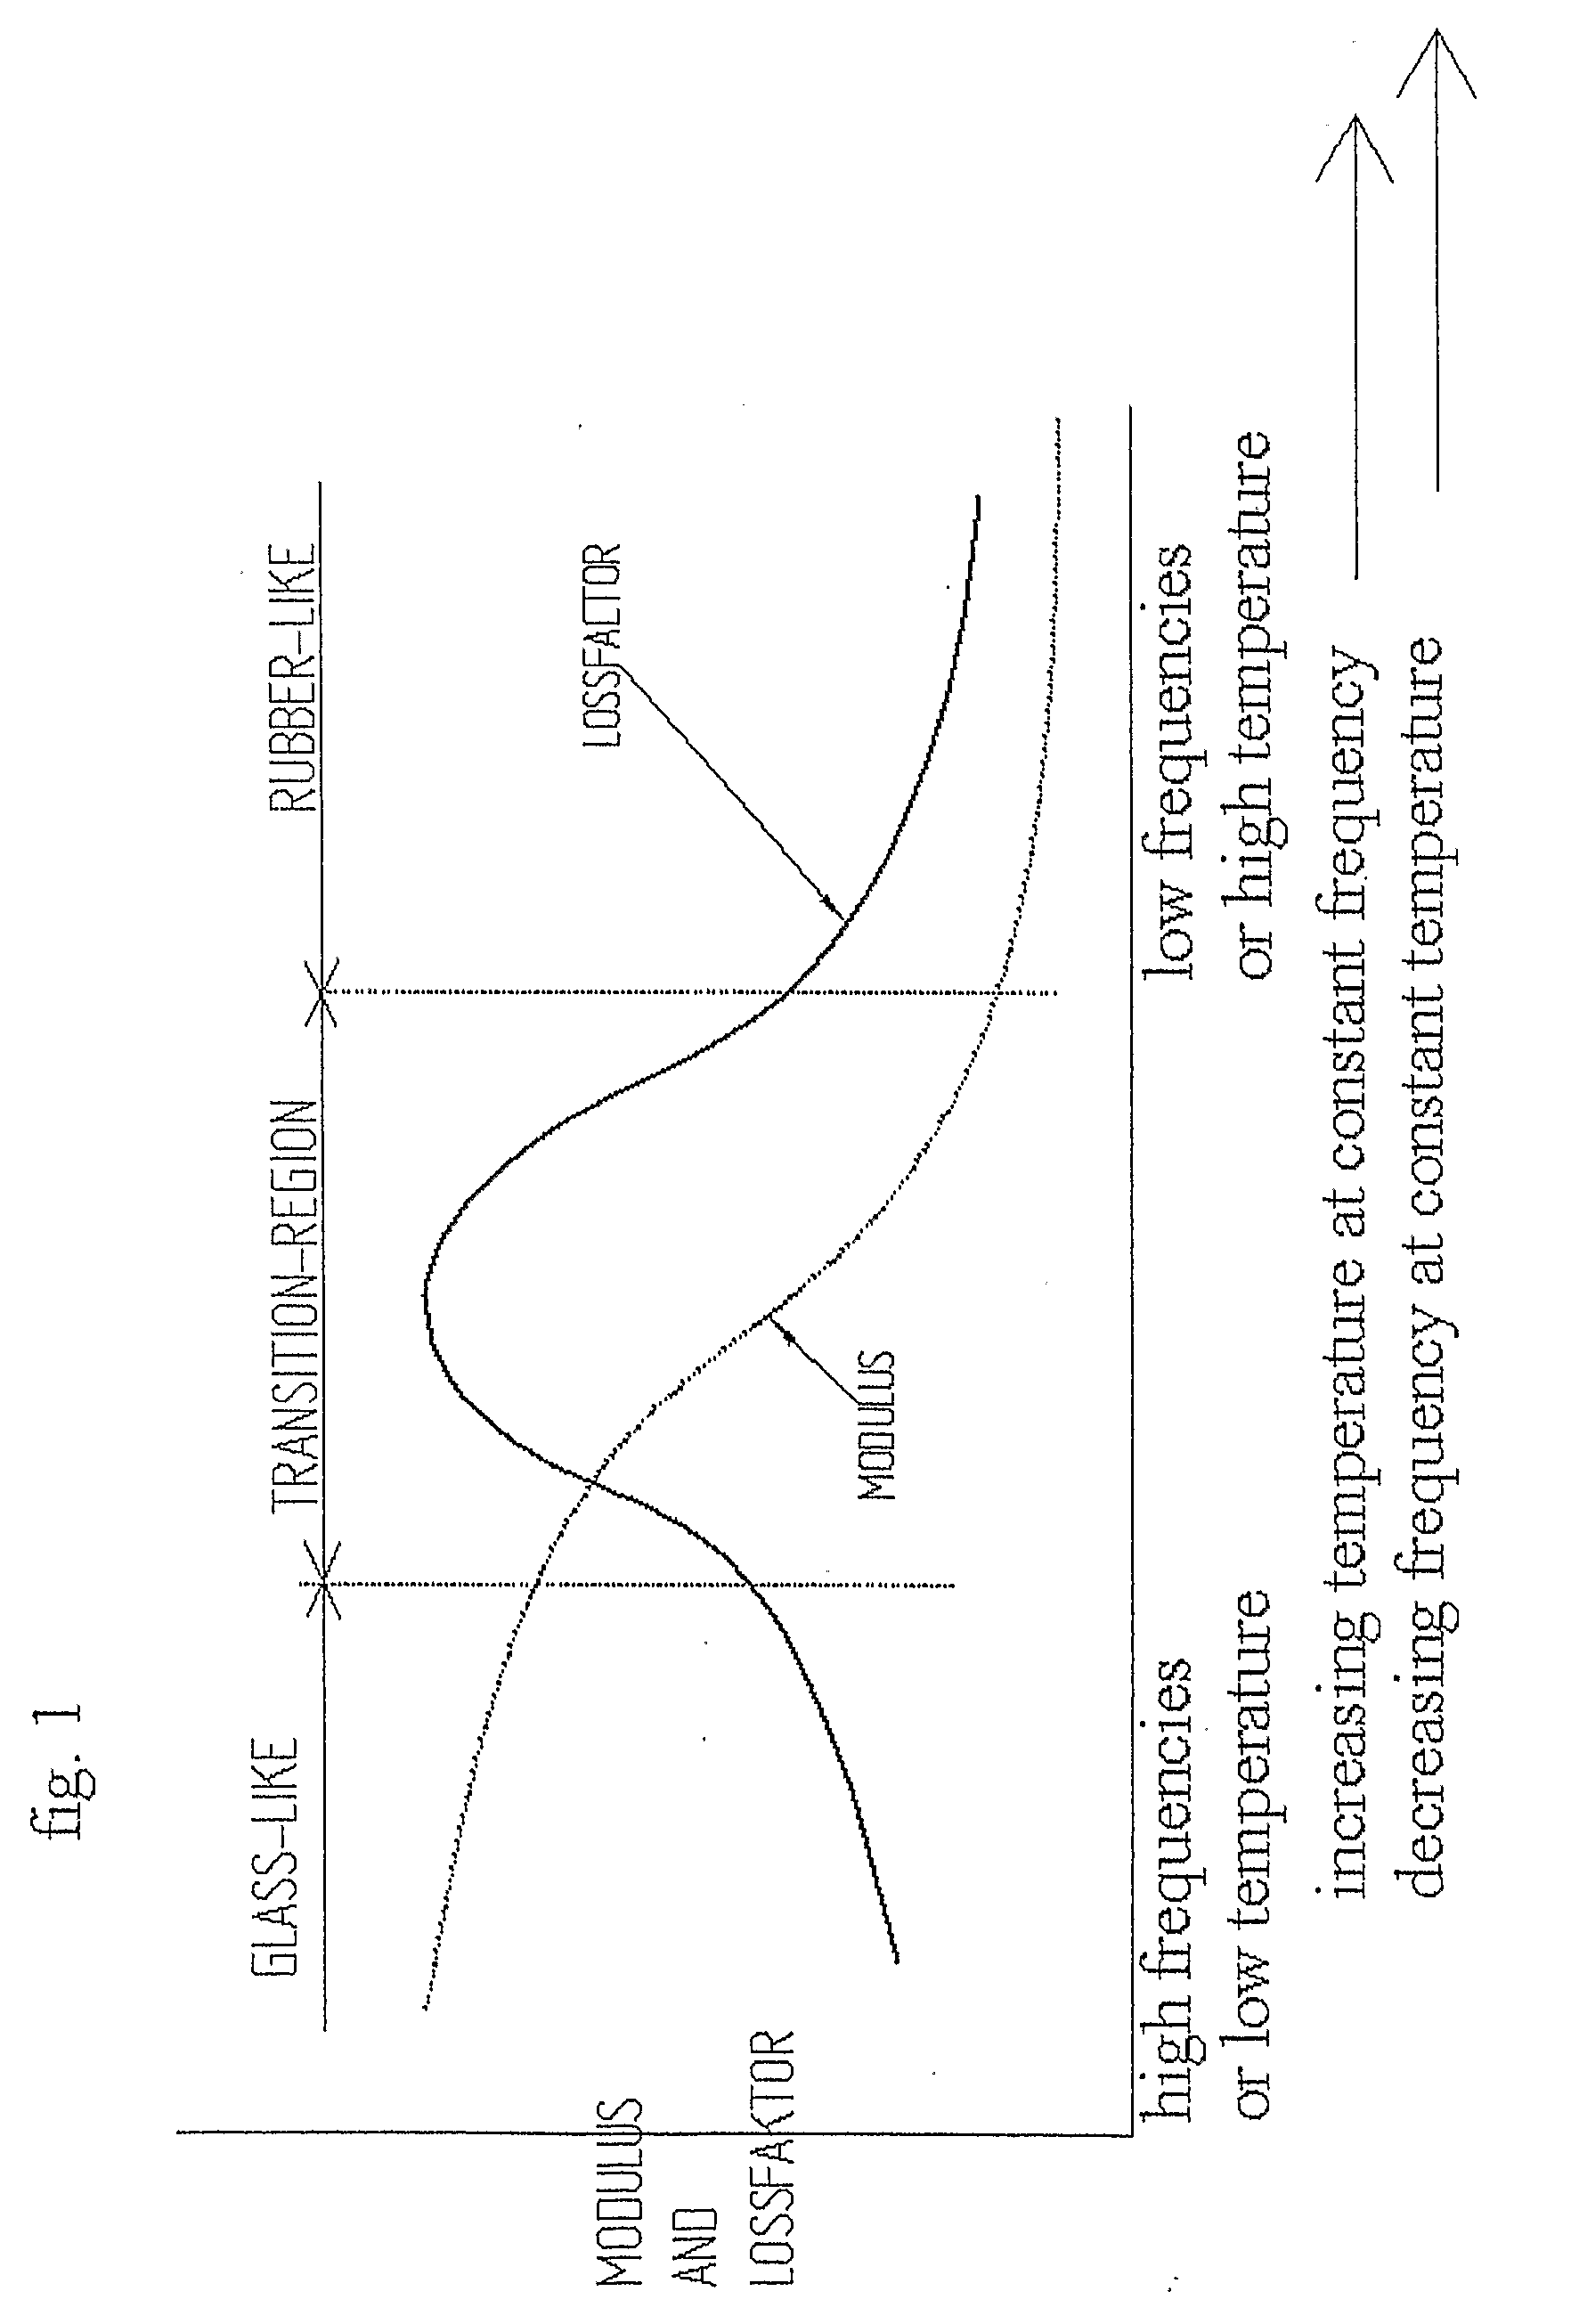 Visco Elastic Damping In A Piping System